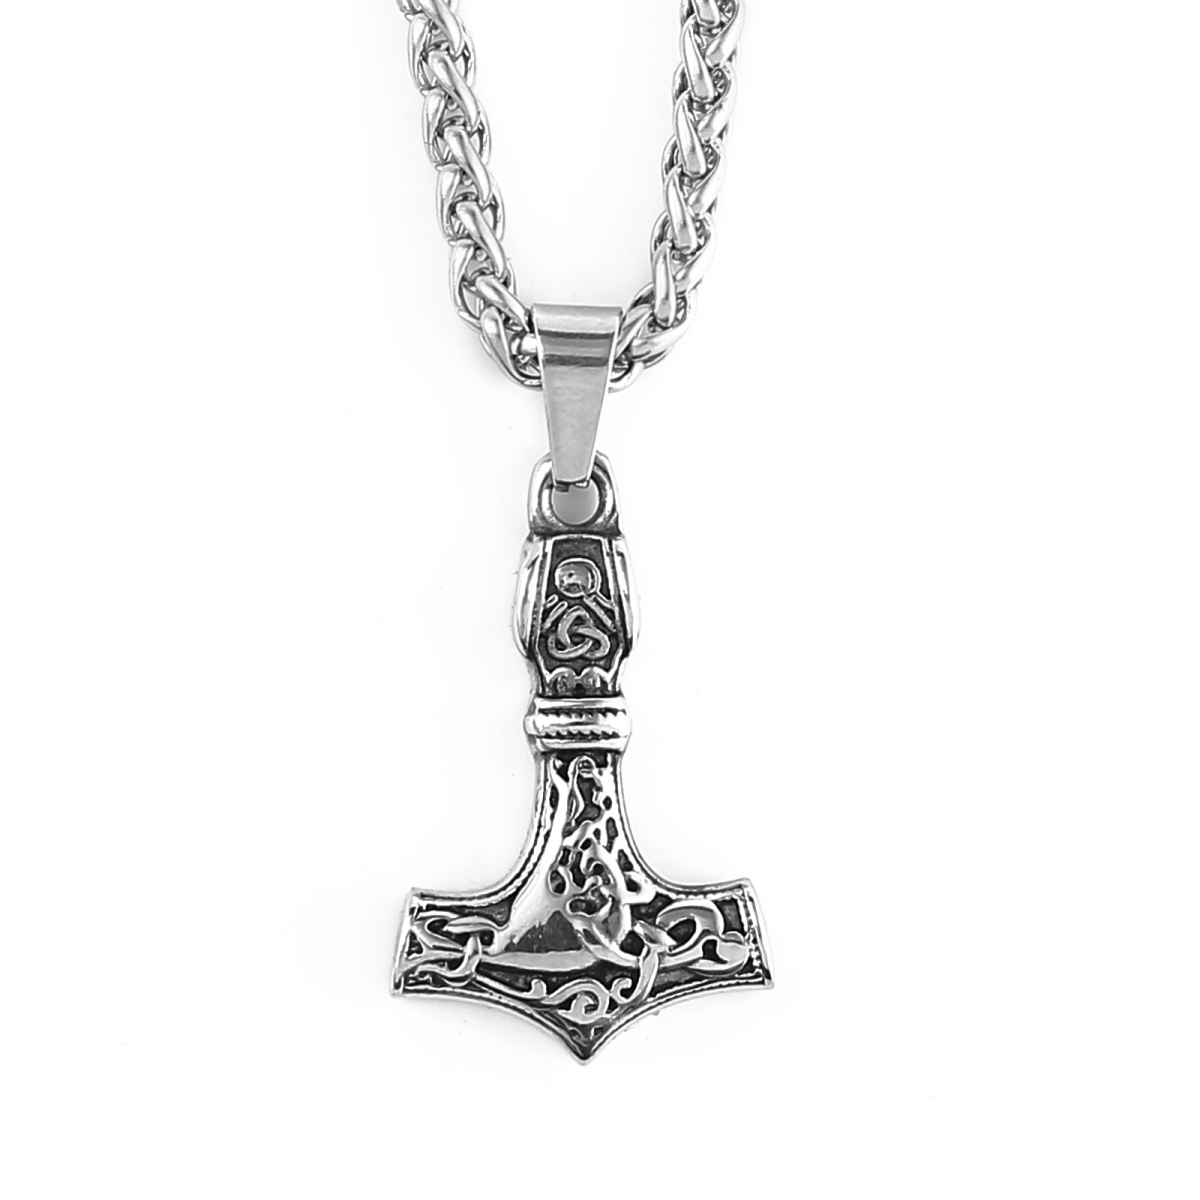 Mjolnir Amulet Necklace US$2.9/PC-NORSECOLLECTION- Viking Jewelry,Viking Necklace,Viking Bracelet,Viking Rings,Viking Mugs,Viking Accessories,Viking Crafts